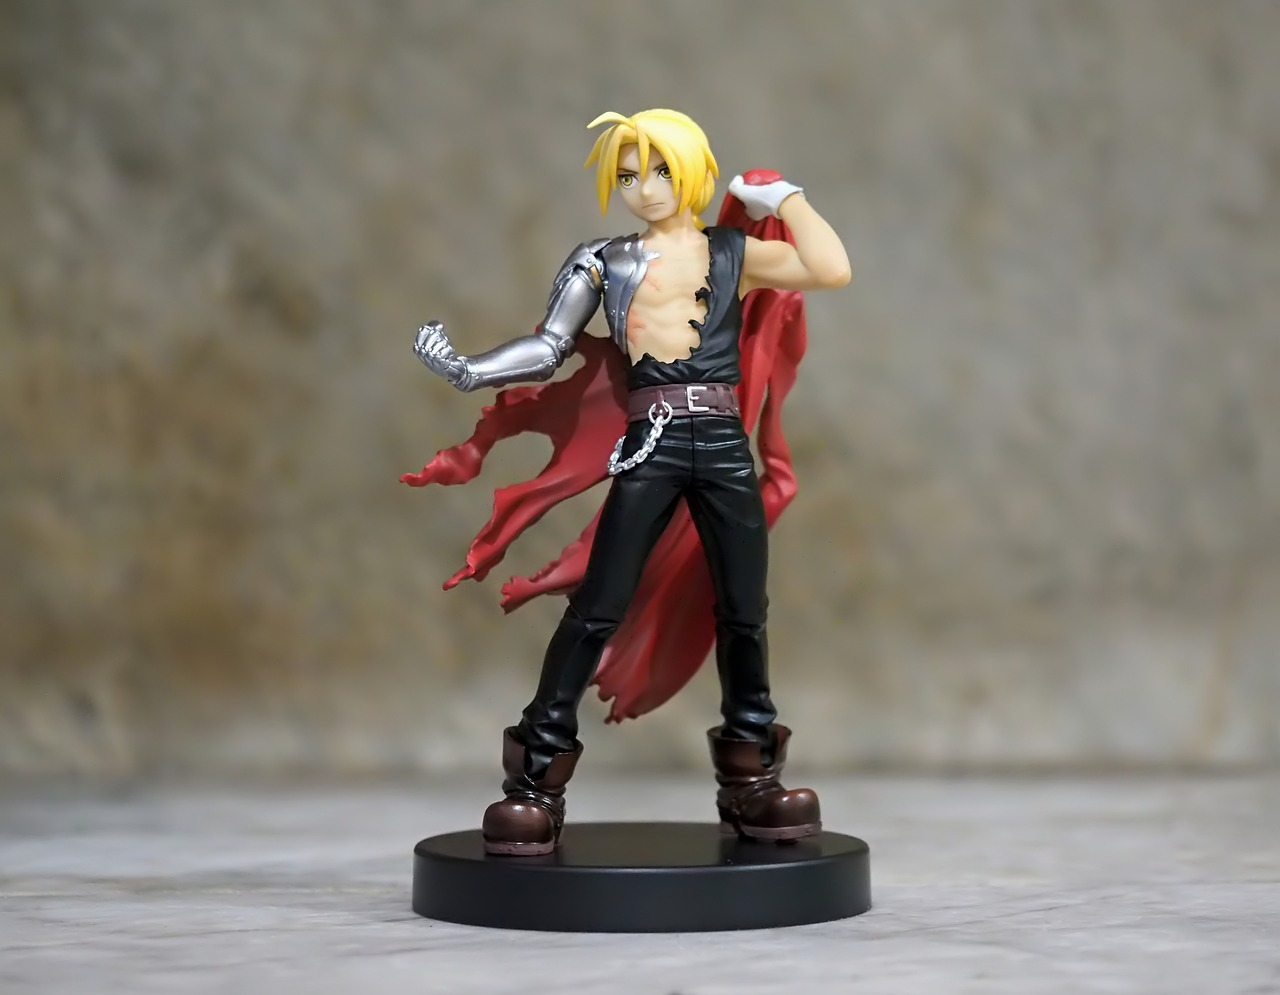 a close up of a figurine of a person with a sword, fullmetal alchemist brotherhood, doing a sassy pose, he-man with a dark manner, product photo